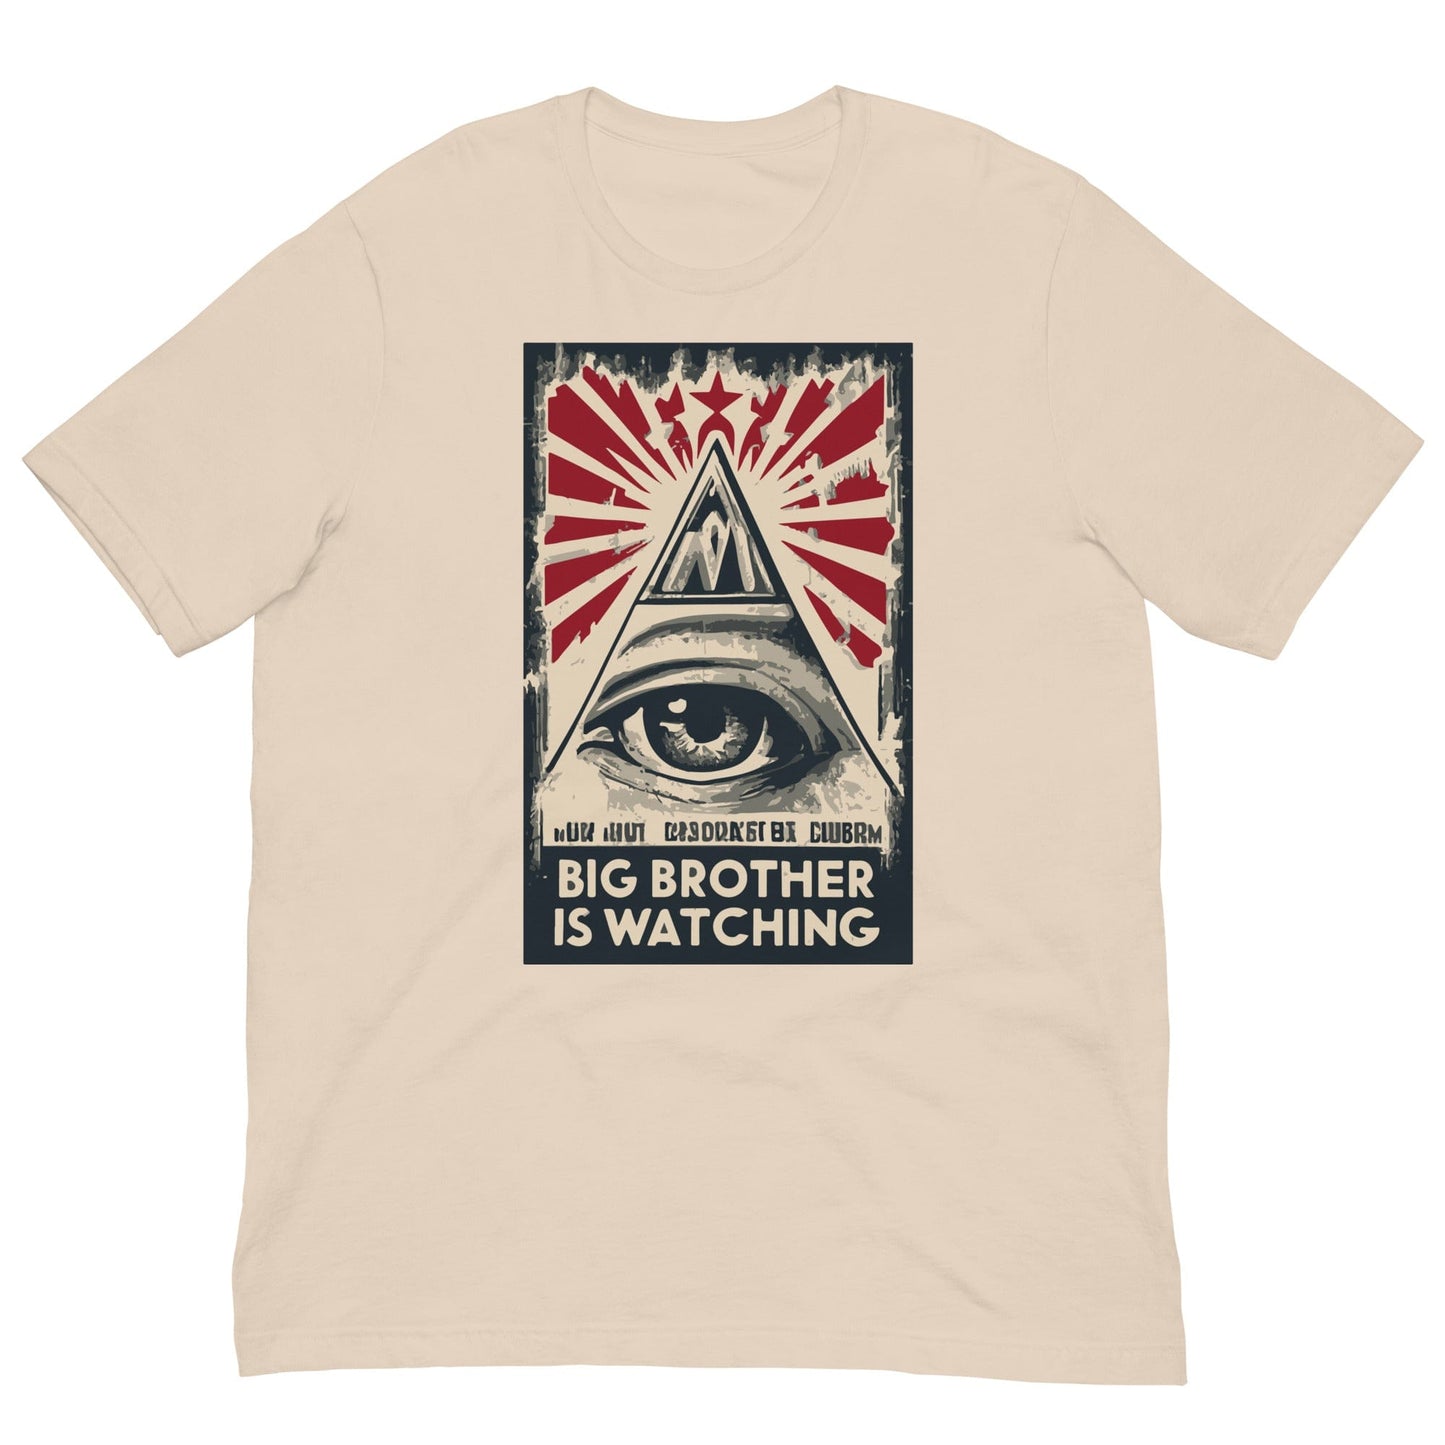 Big Brother is watching T-shirt Soft Cream / XS